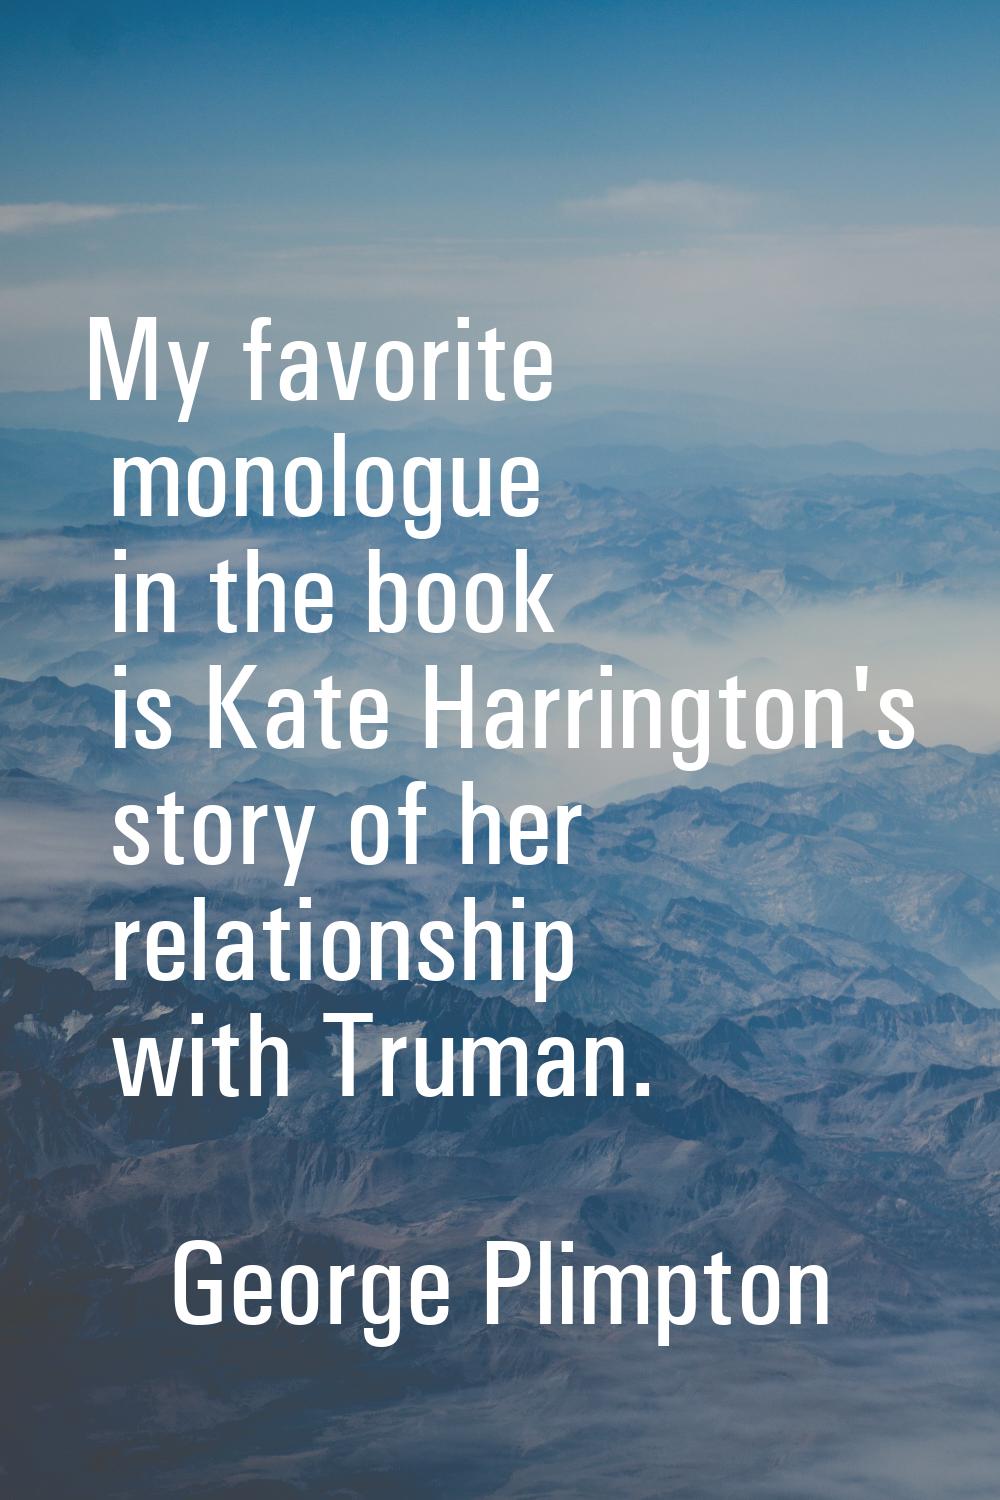 My favorite monologue in the book is Kate Harrington's story of her relationship with Truman.